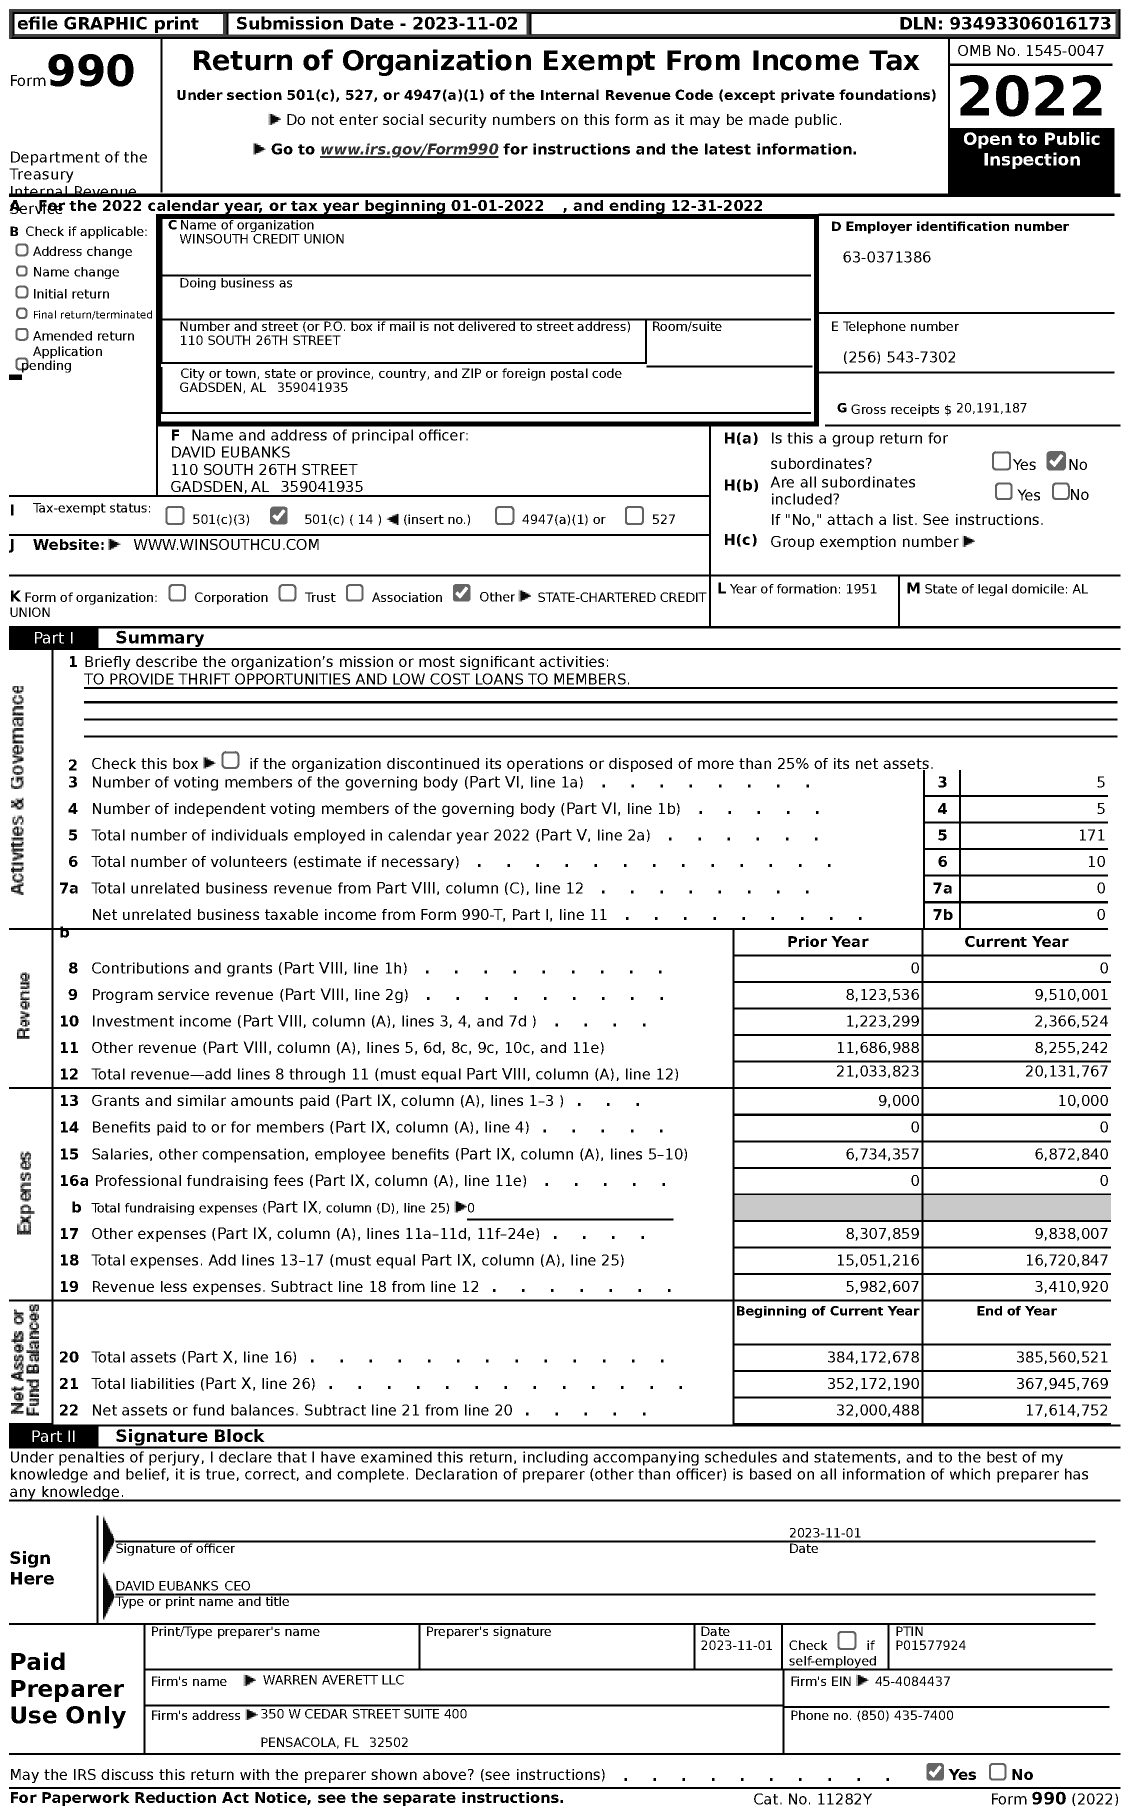 Image of first page of 2022 Form 990 for Winsouth Credit Union